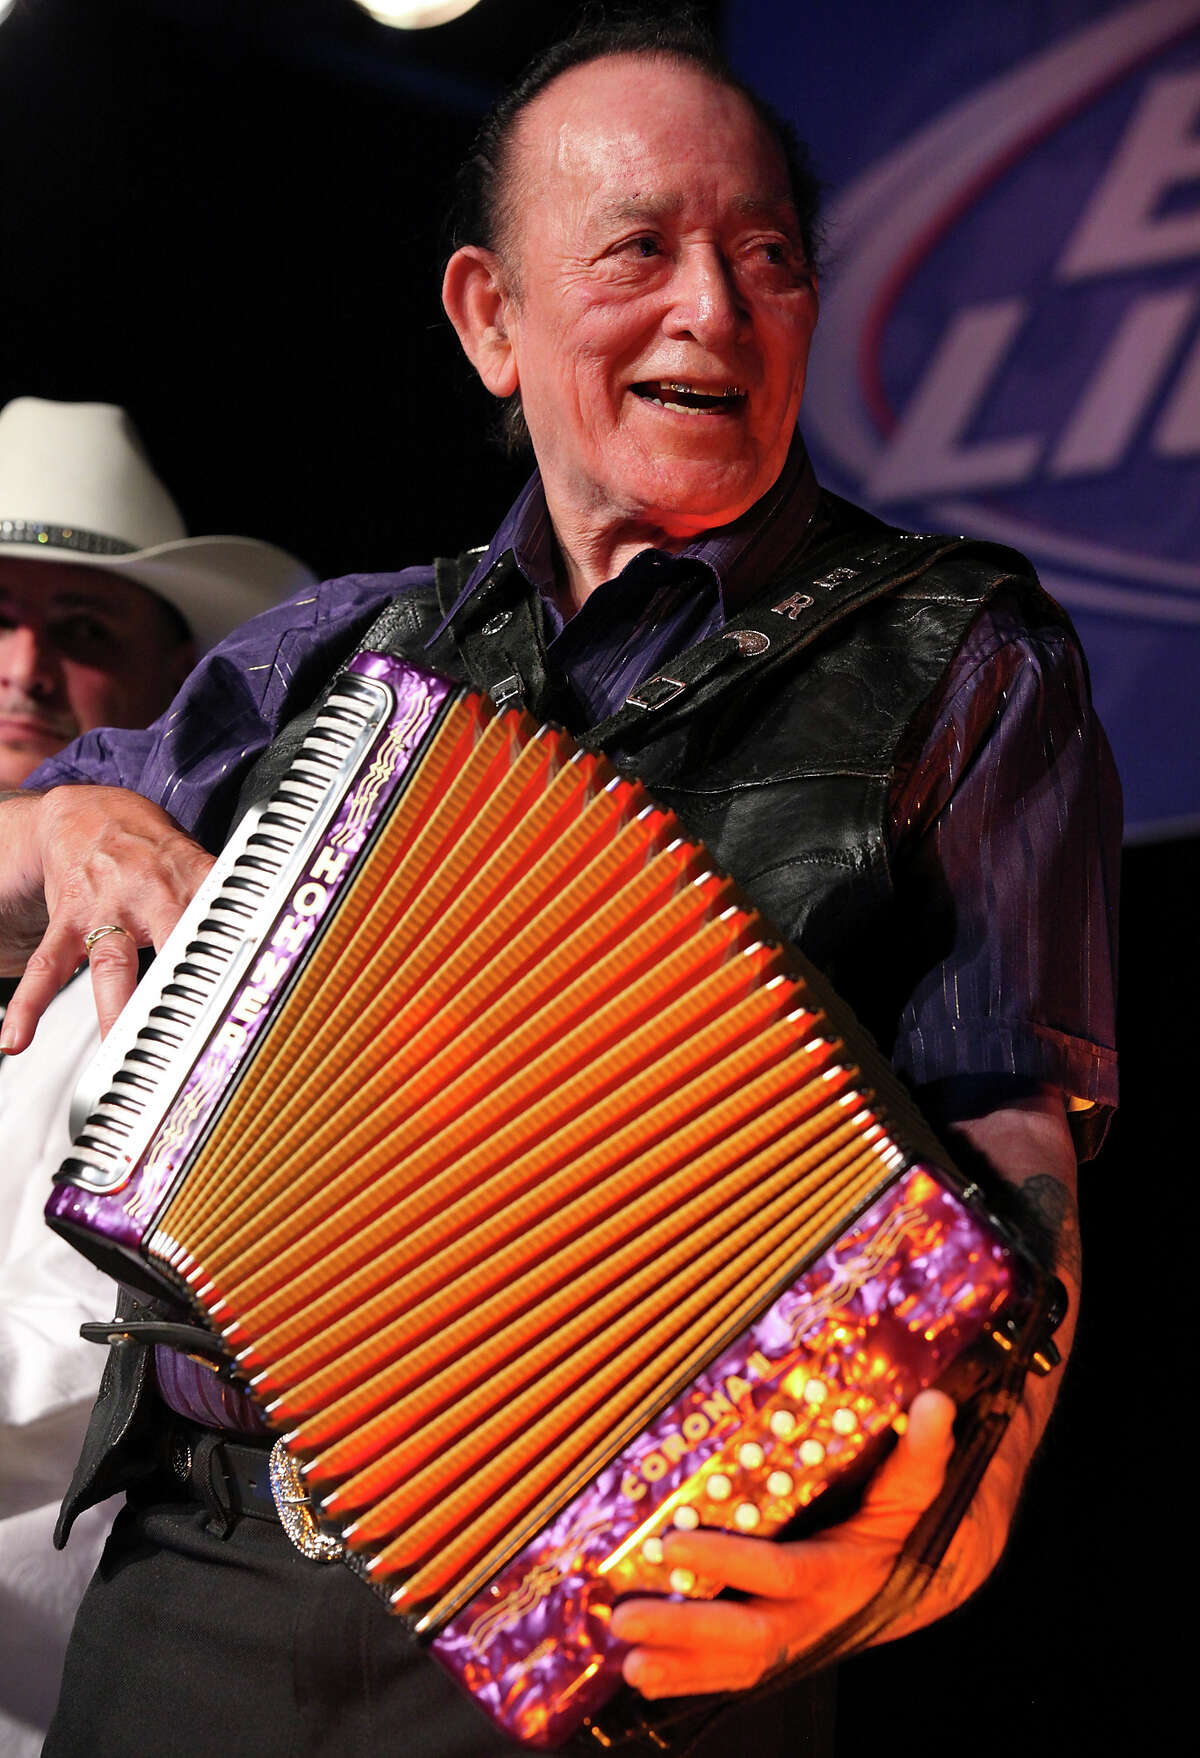 A recipient of the National Endowment for the Arts 2012 National Heritage Fellowship, Flaco Jimenez will be joining the pack onstage.